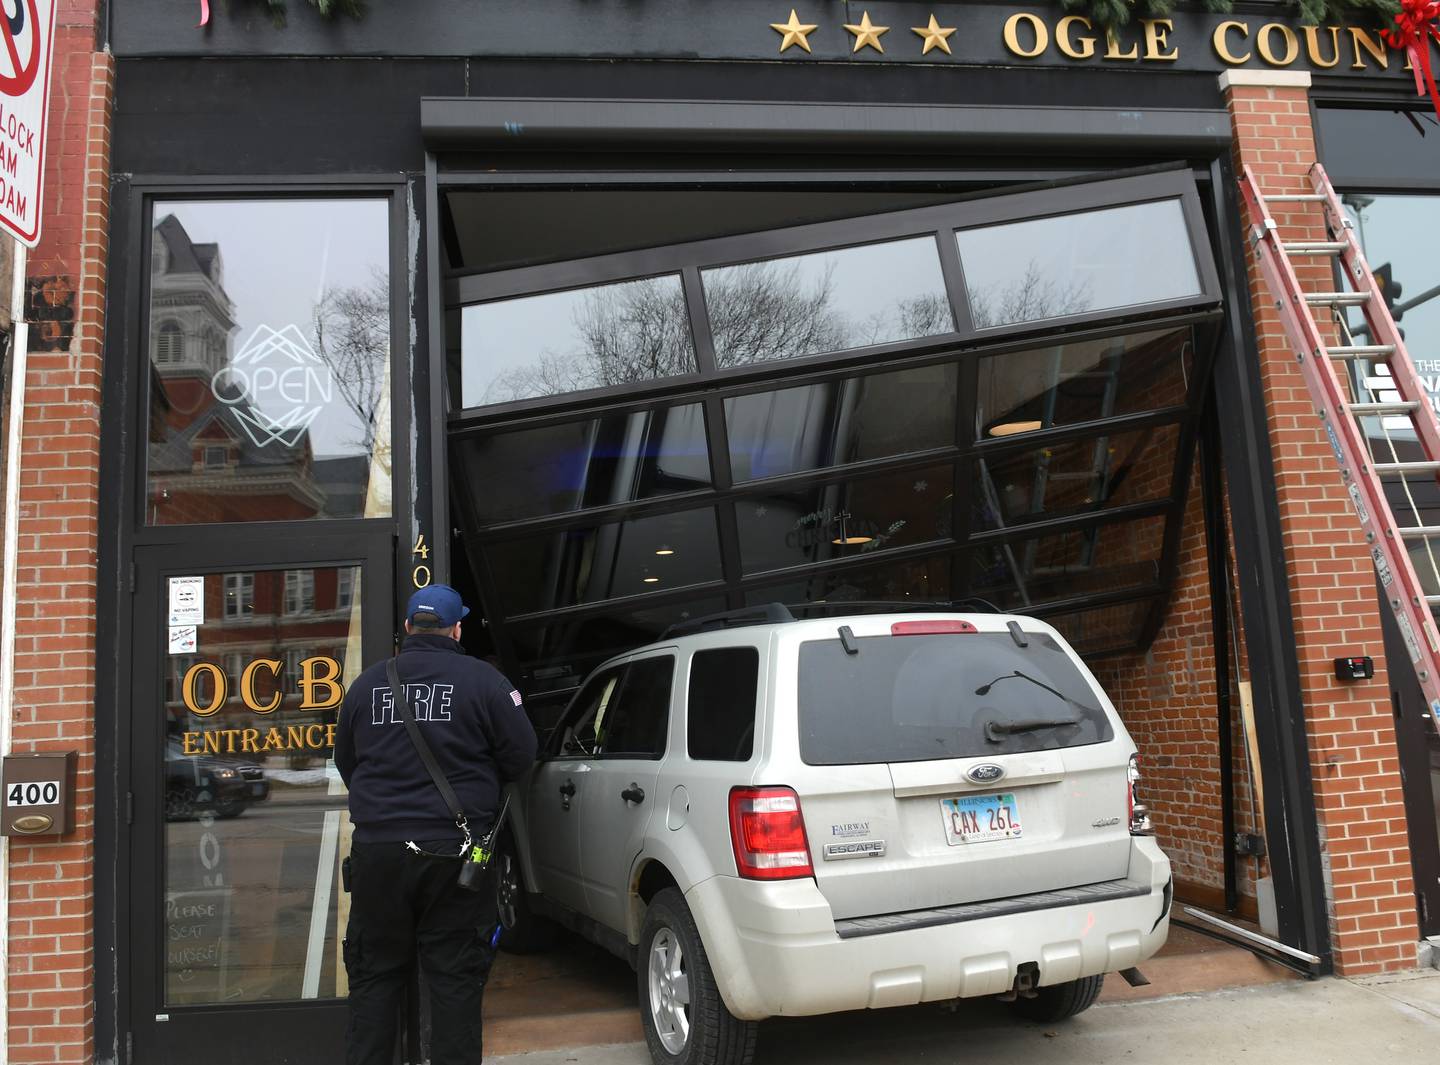 A car crashed into the Ogle County Brewery in downtown Oregon early Sunday afternoon, hitting another car at the intersection of Illinois 64 and Illinois 2. The driver and patrons inside the store were not injured.